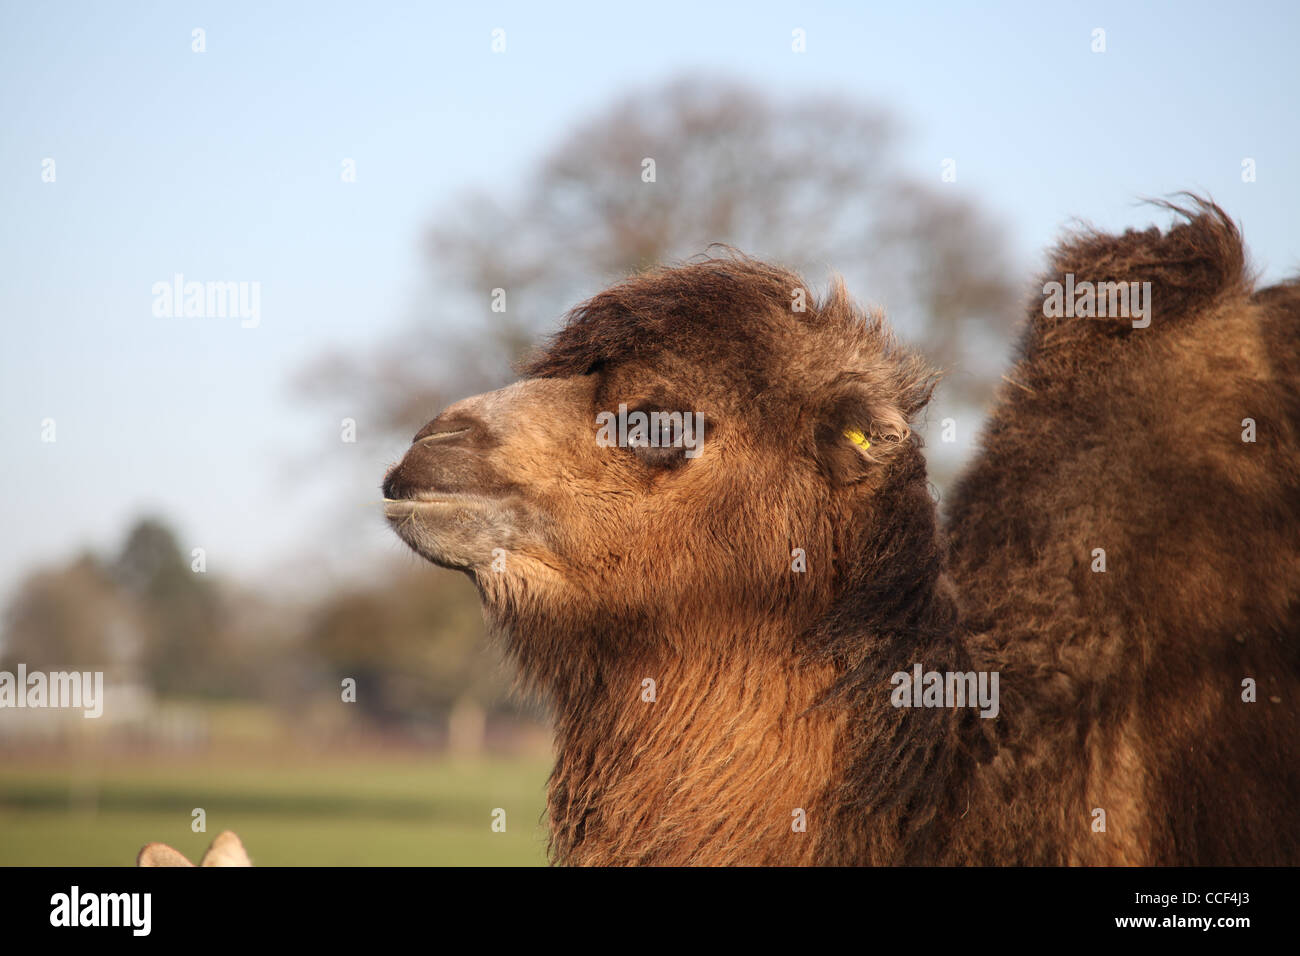 Bactrian Camel at Whipsnade Zoo Stock Photo